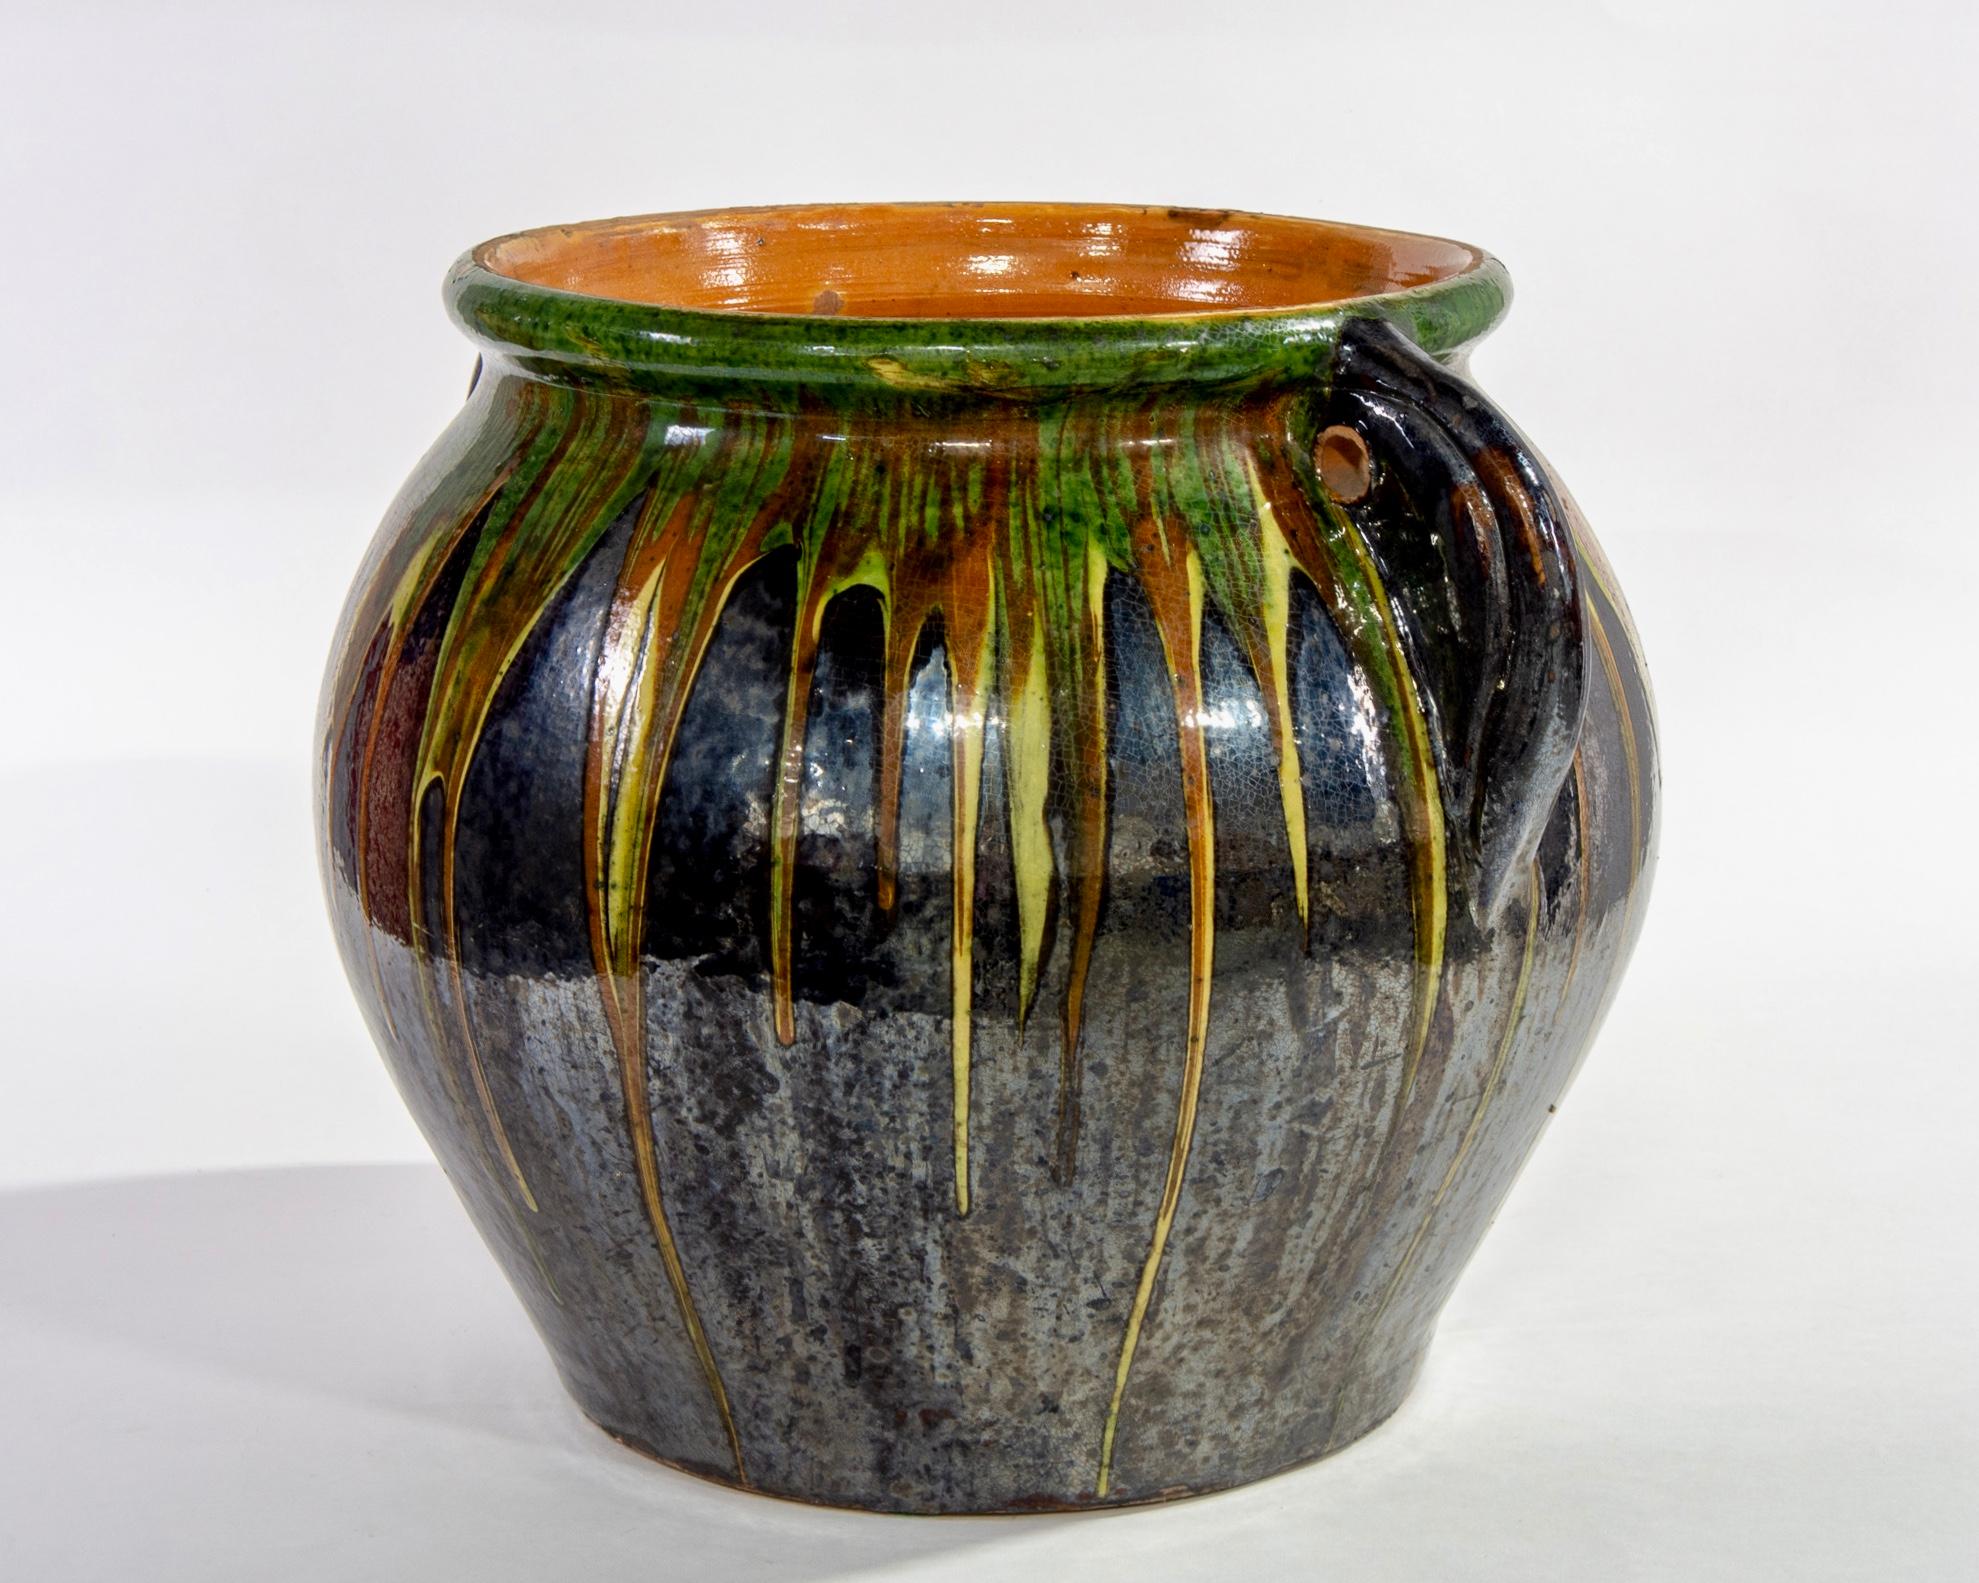 Large red ware ceramic midcentury glazed hand thrown pot with black base and green/yellow/red drip embellishment. Found in Europe.